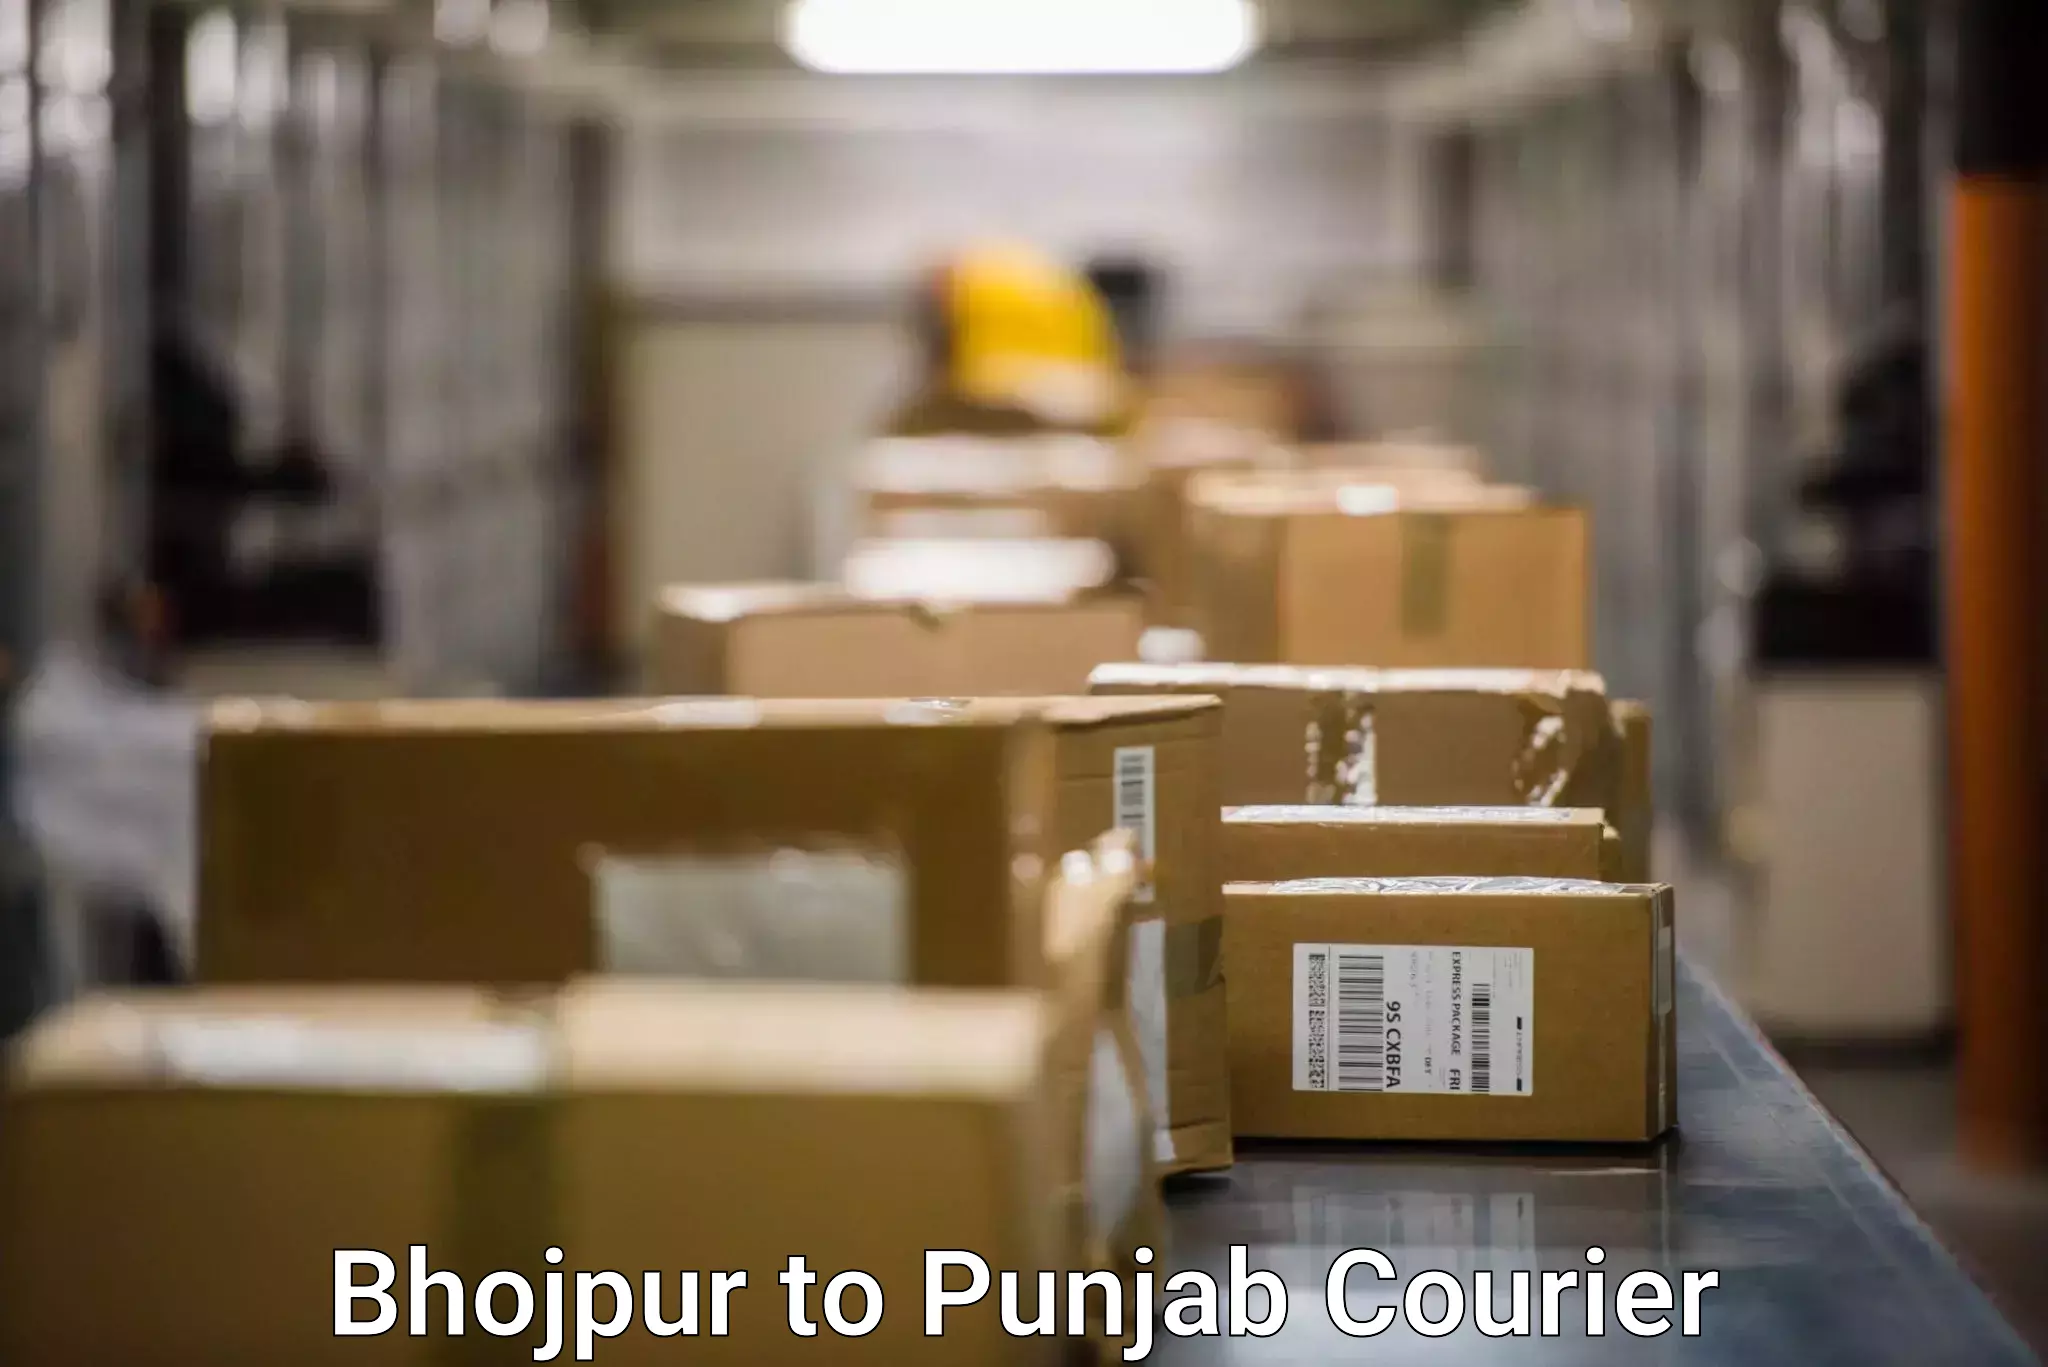 Global shipping networks Bhojpur to Firozpur